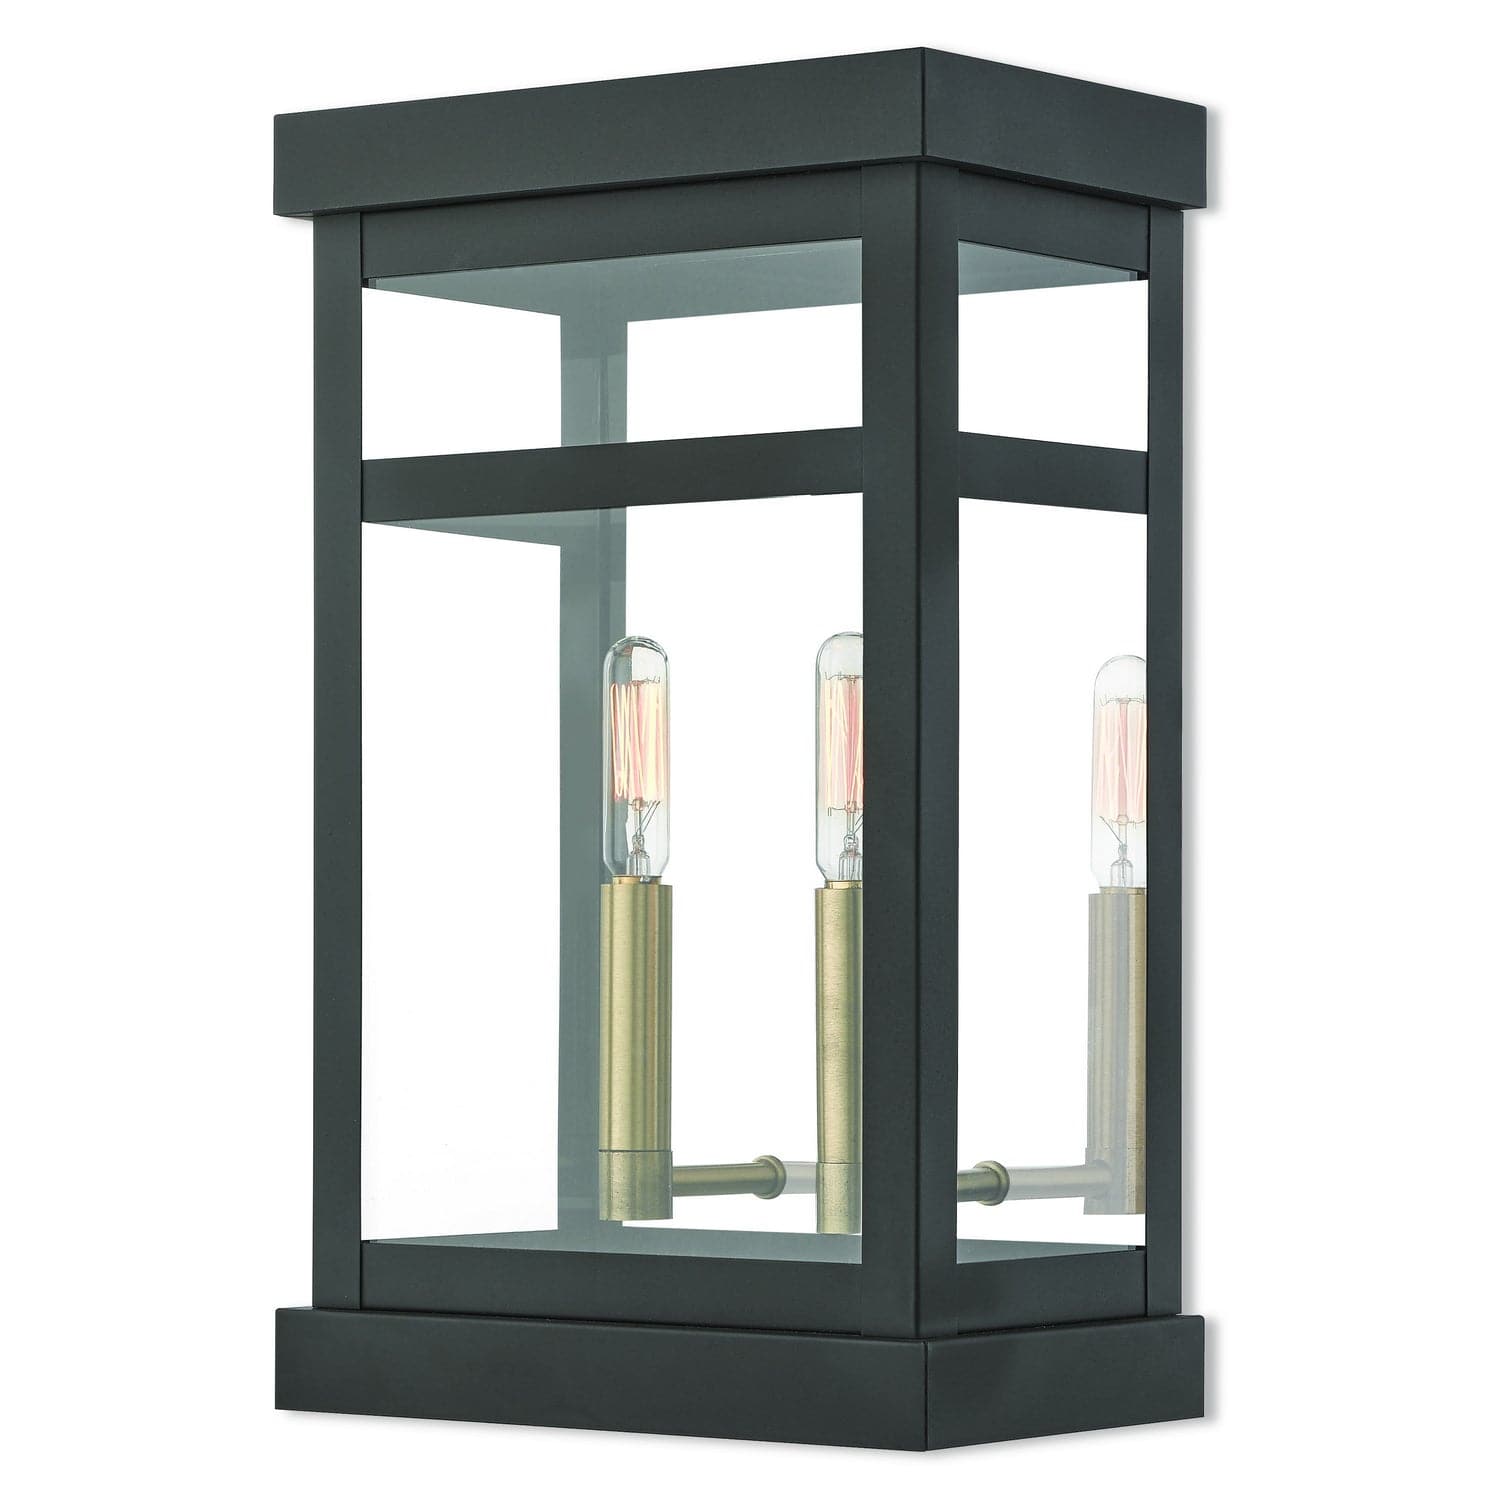 Livex Lighting - 20705-07 - Two Light Outdoor Wall Lantern - Hopewell - Bronze w/ Antique Brass Cluster and Polished Chrome Stainless Steel